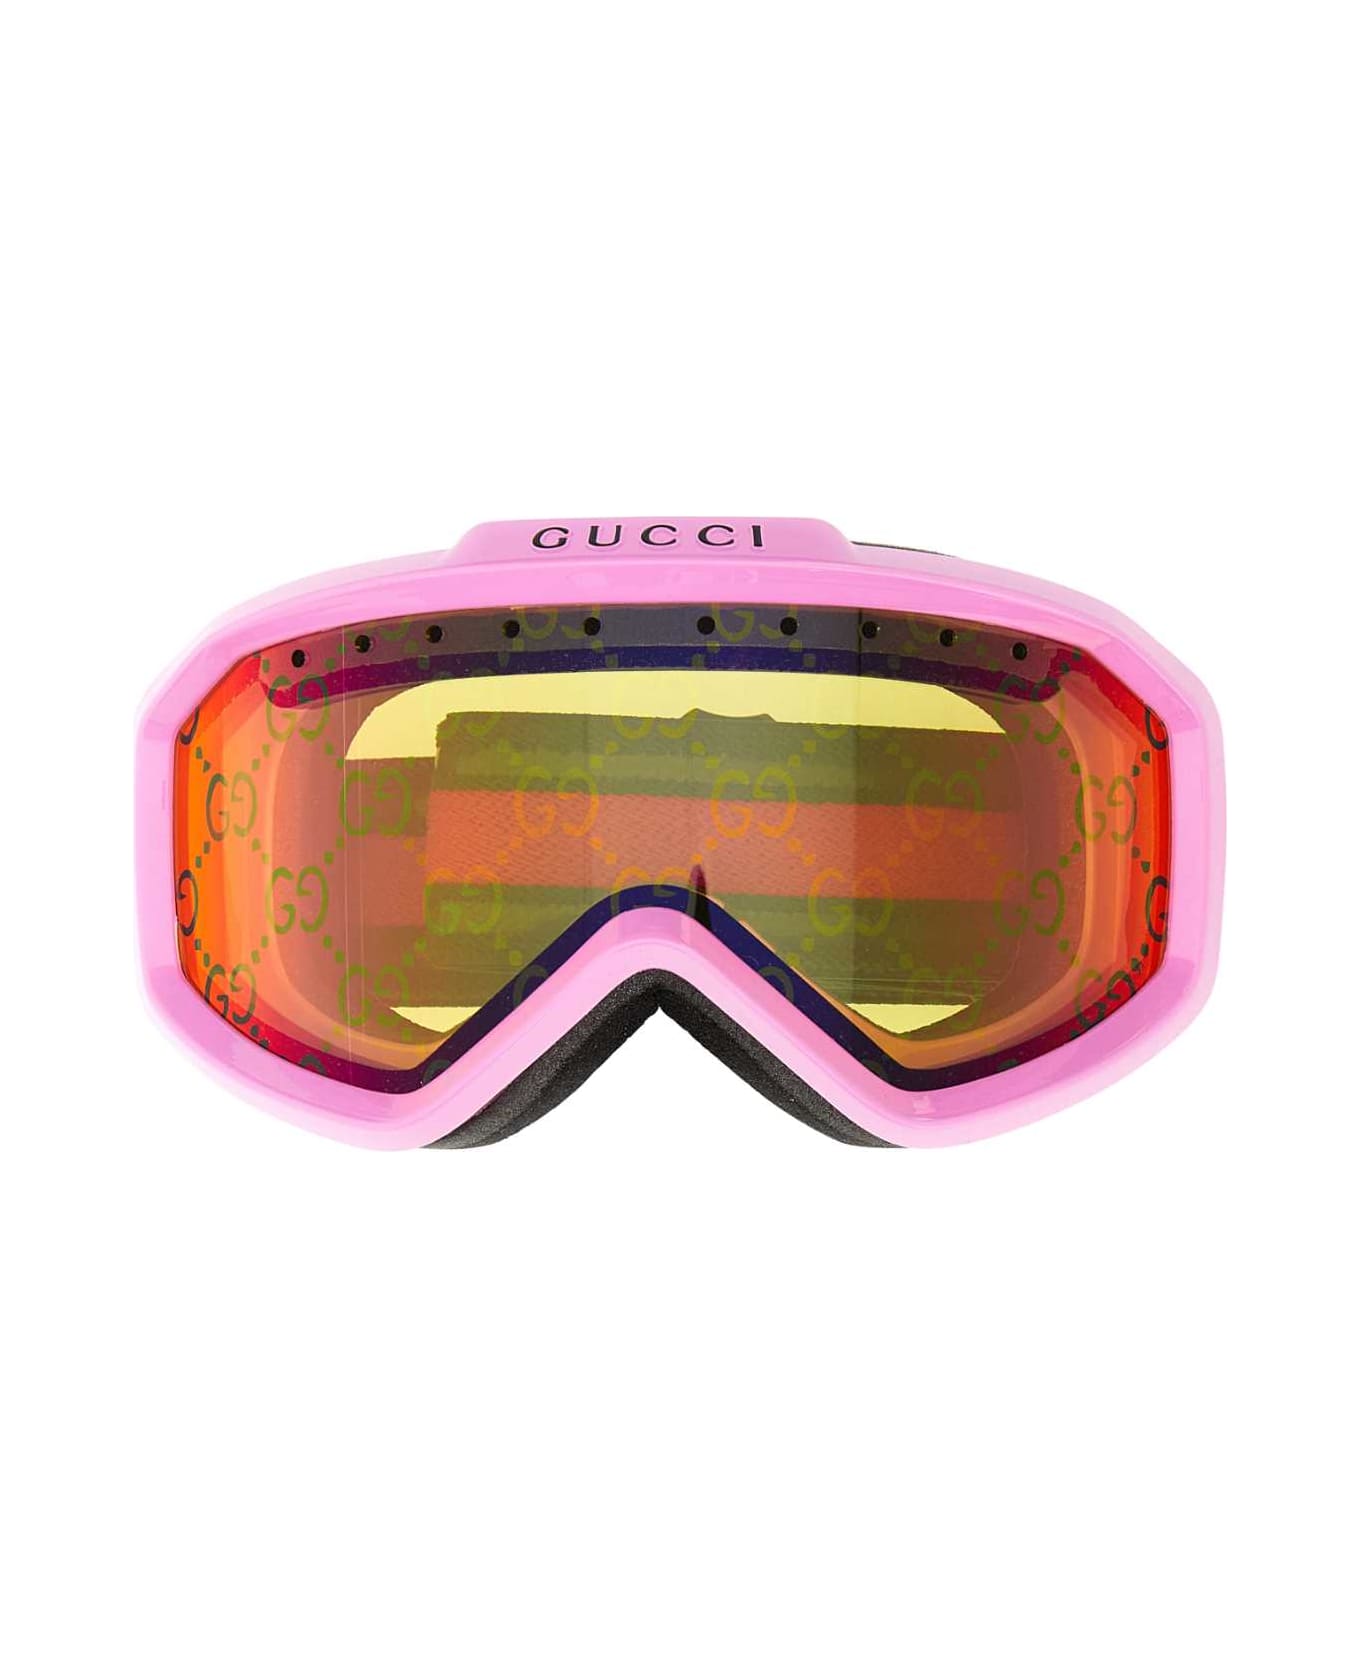 Gucci Pink Acetate Snow Mask - 5872